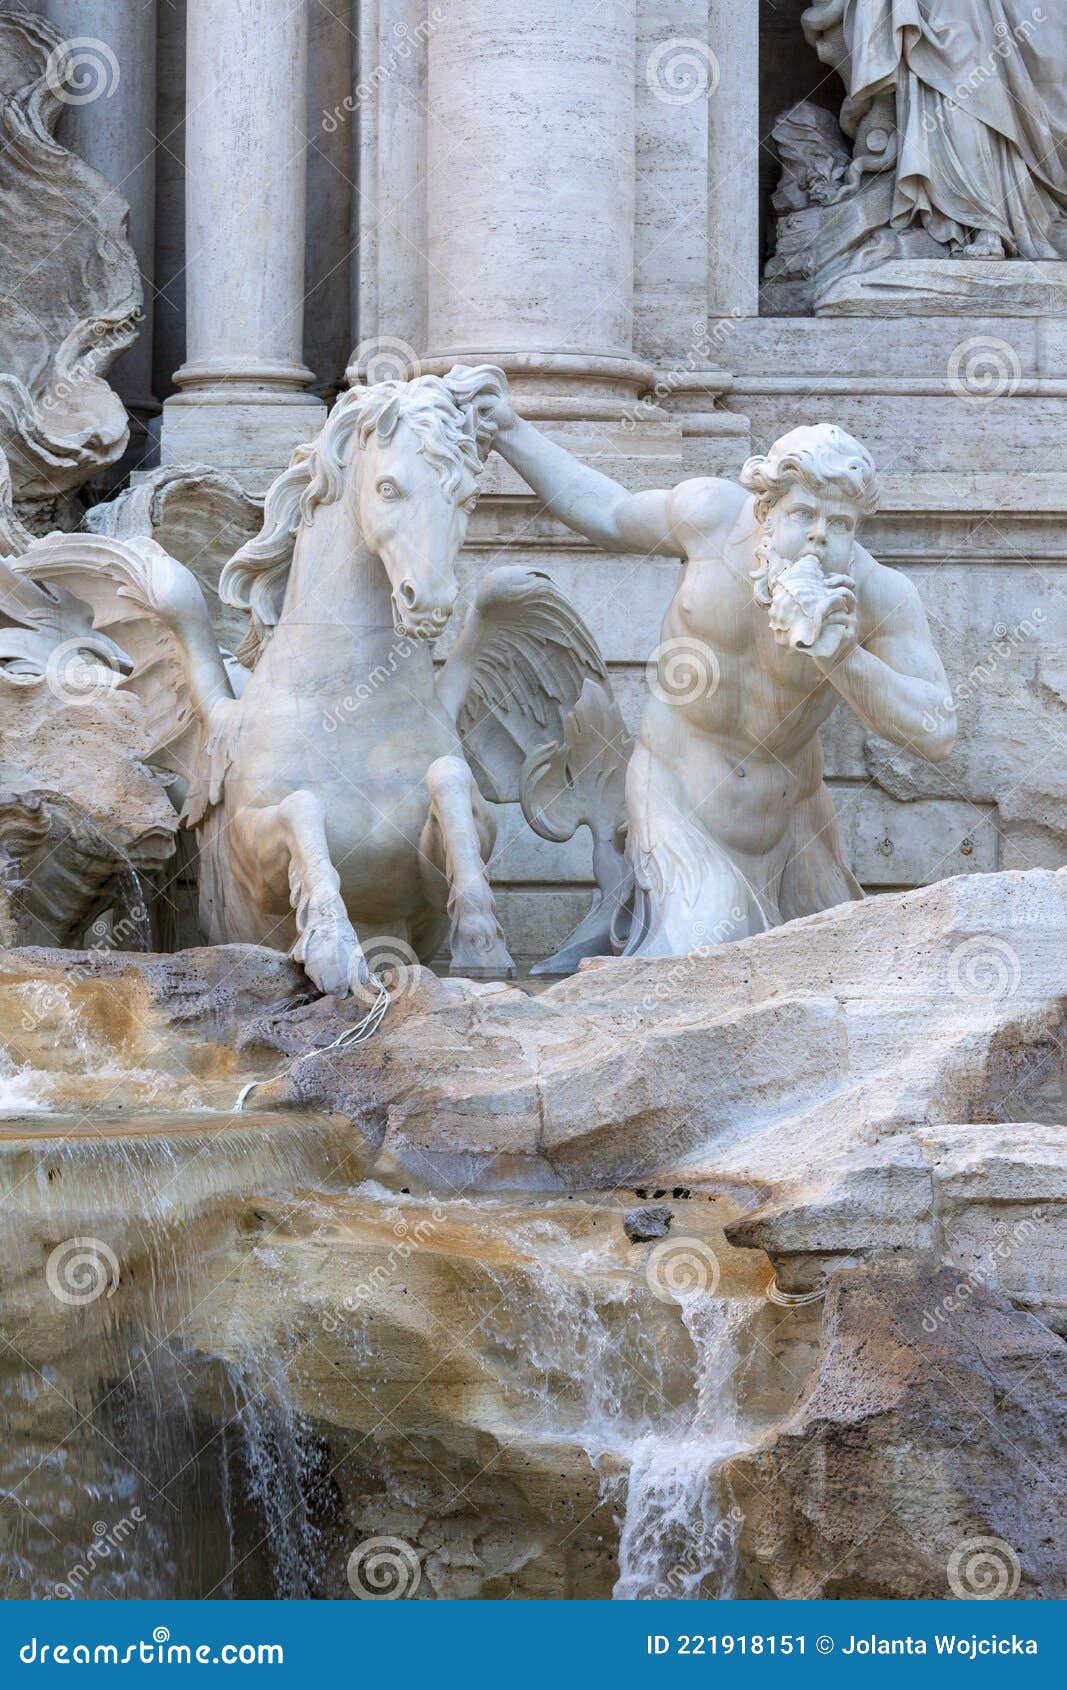 18th century trevi fountain, character of triton with a horse, rome, italy